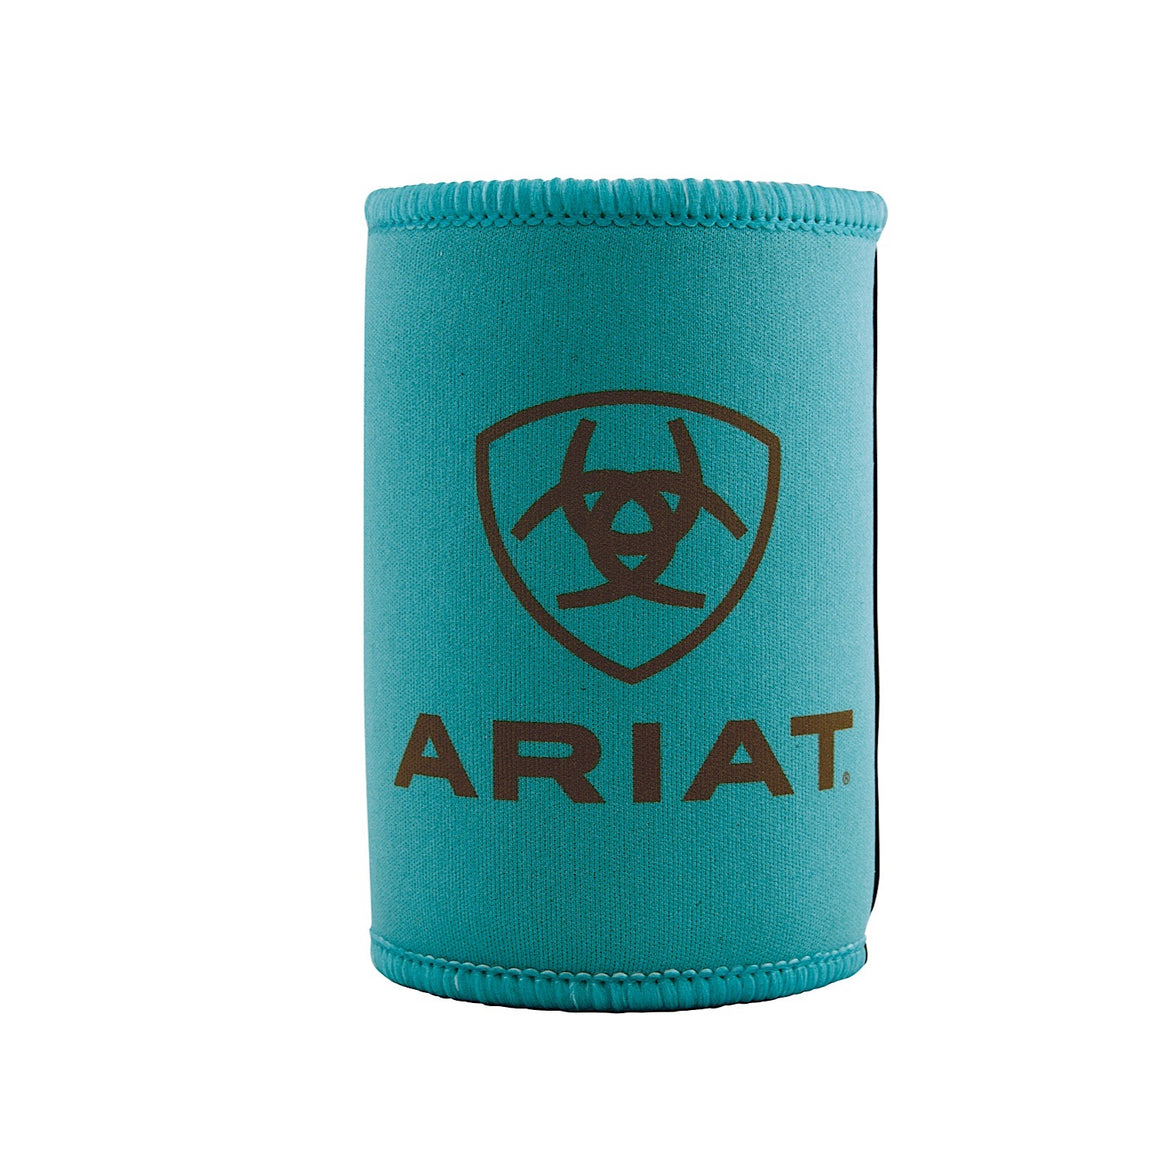 Ariat Stubby Cooler Turquoise/Brown 3-300TQ